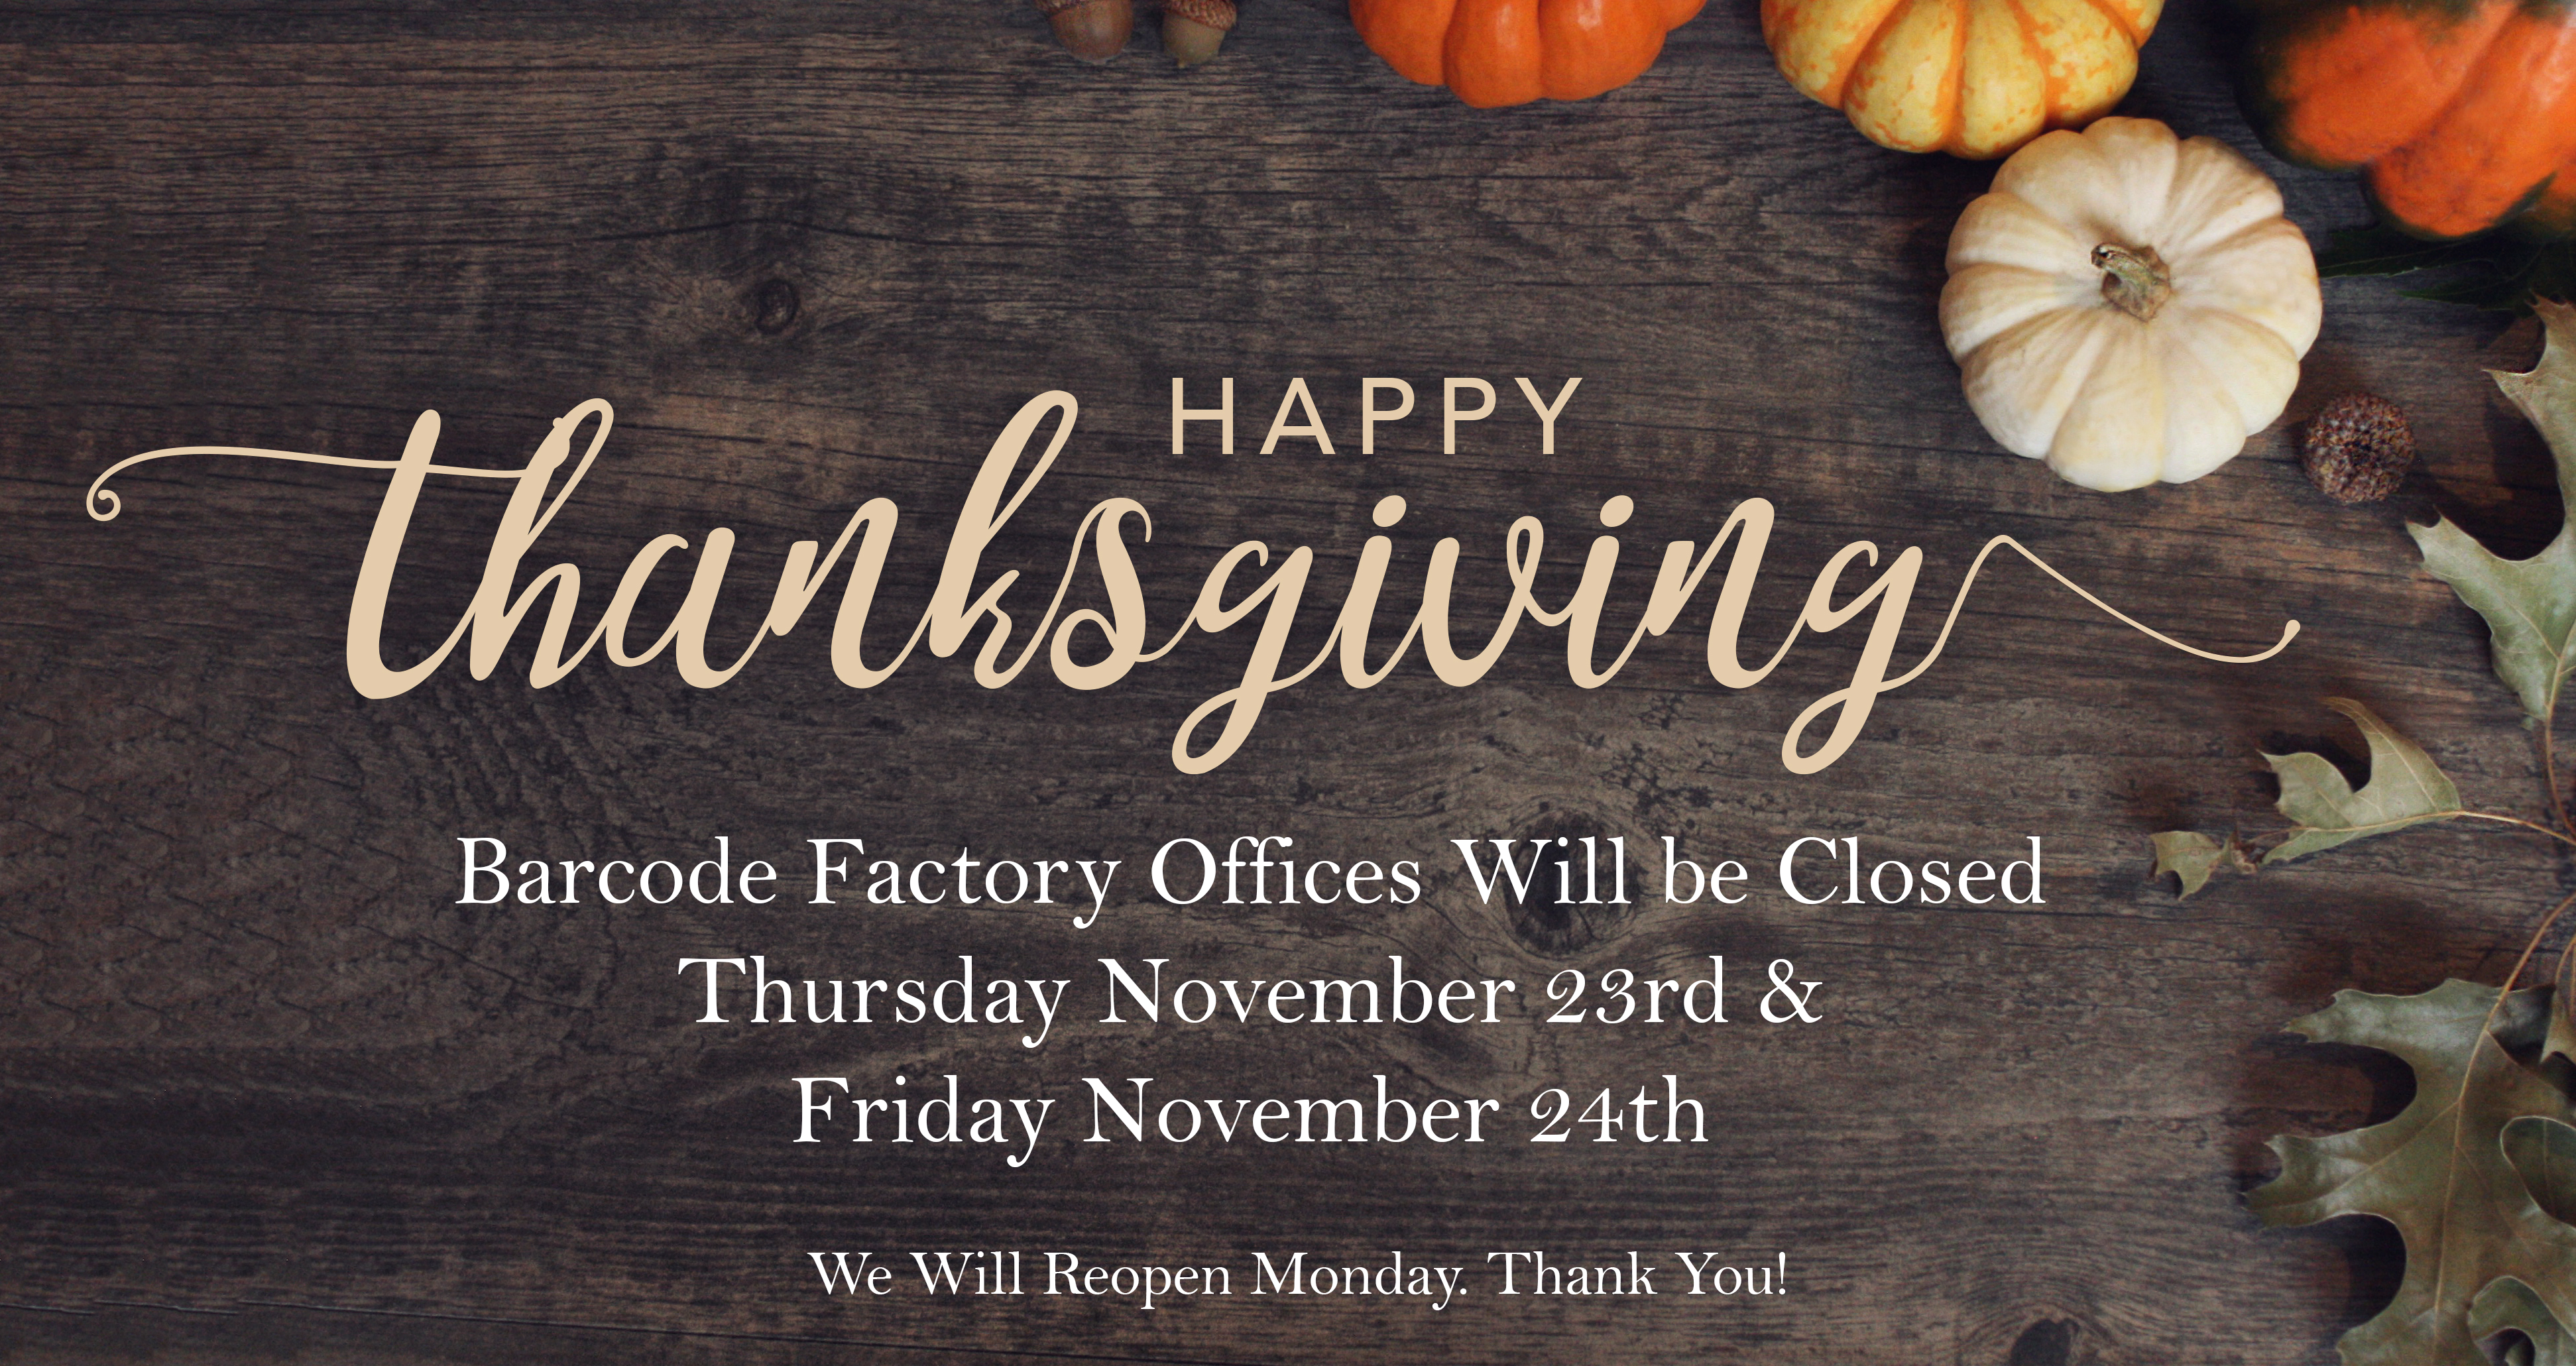 Happy Thanksgiving! Barcode Factory Offices Will Be Closed Nov 24th and Nov 25th.